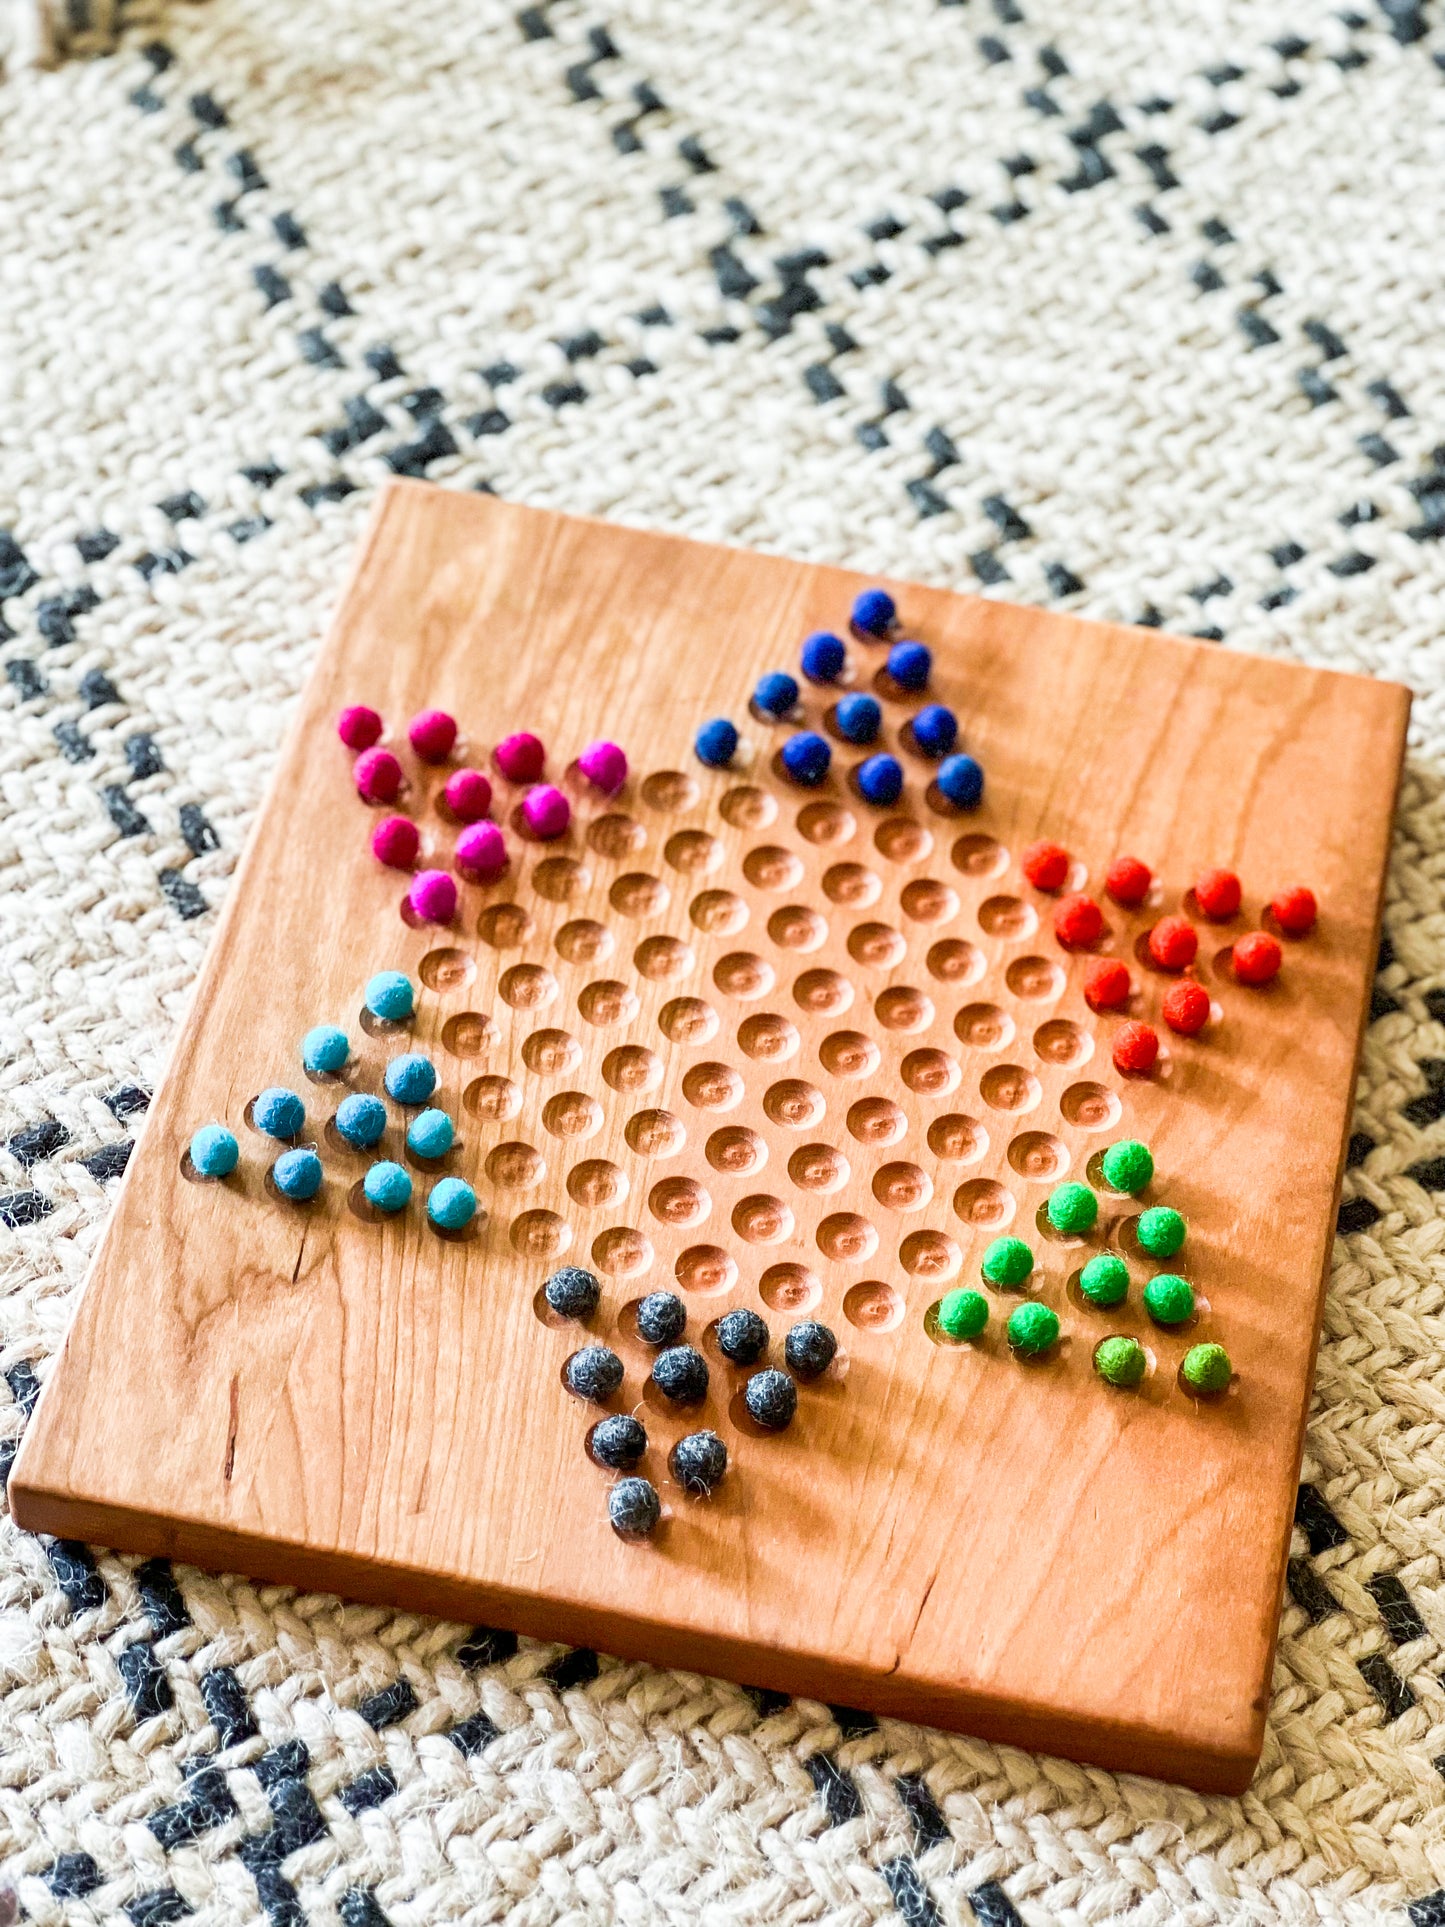 Chinese checkers game board